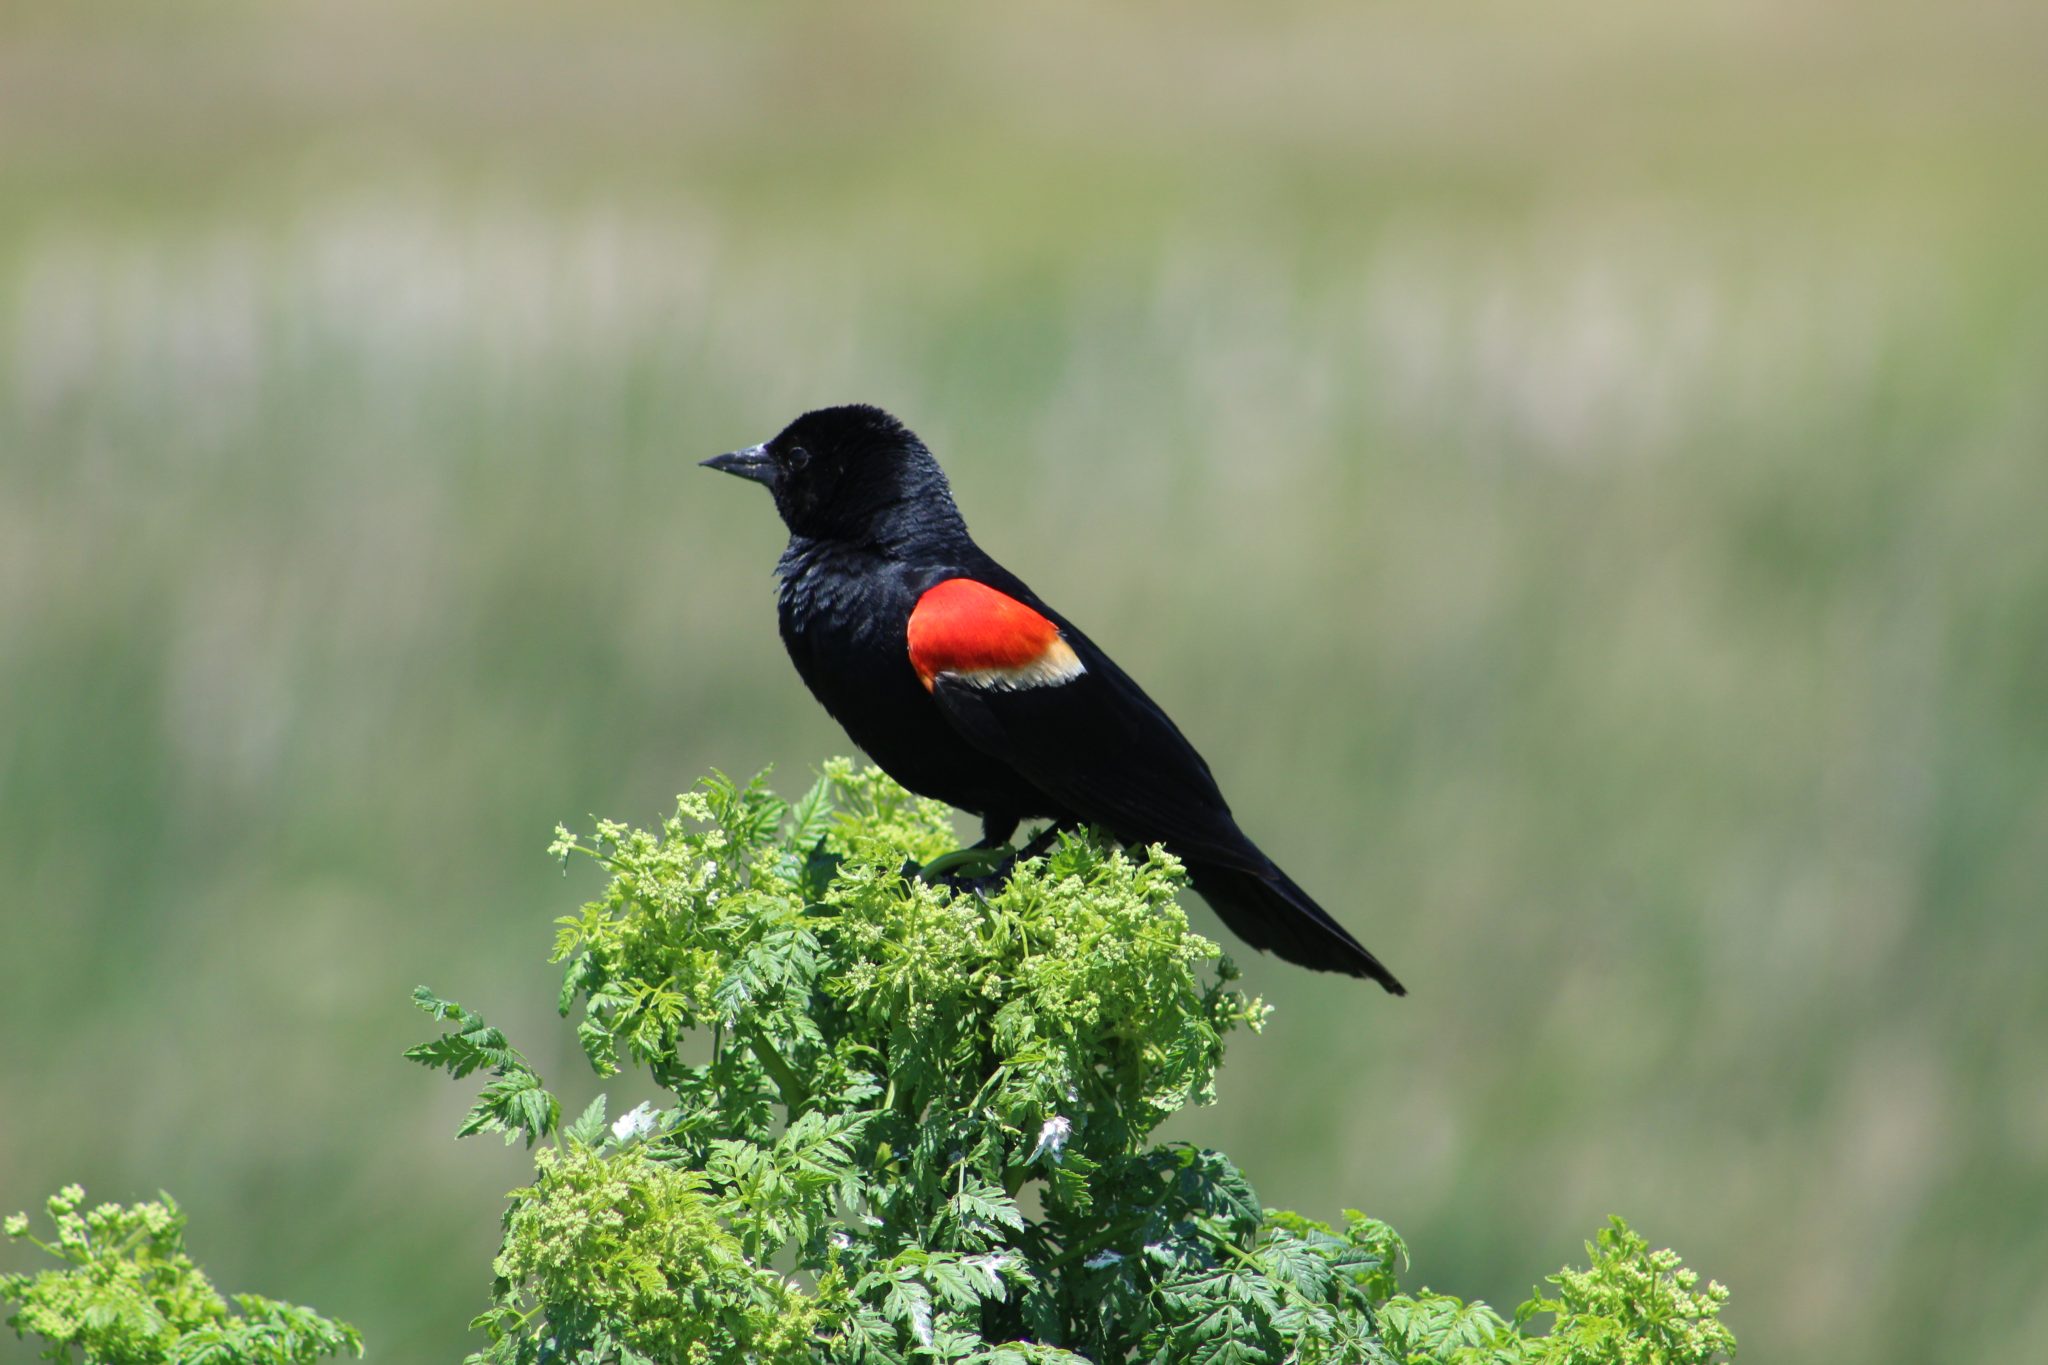 Red-winged blackbird perched on a bush.